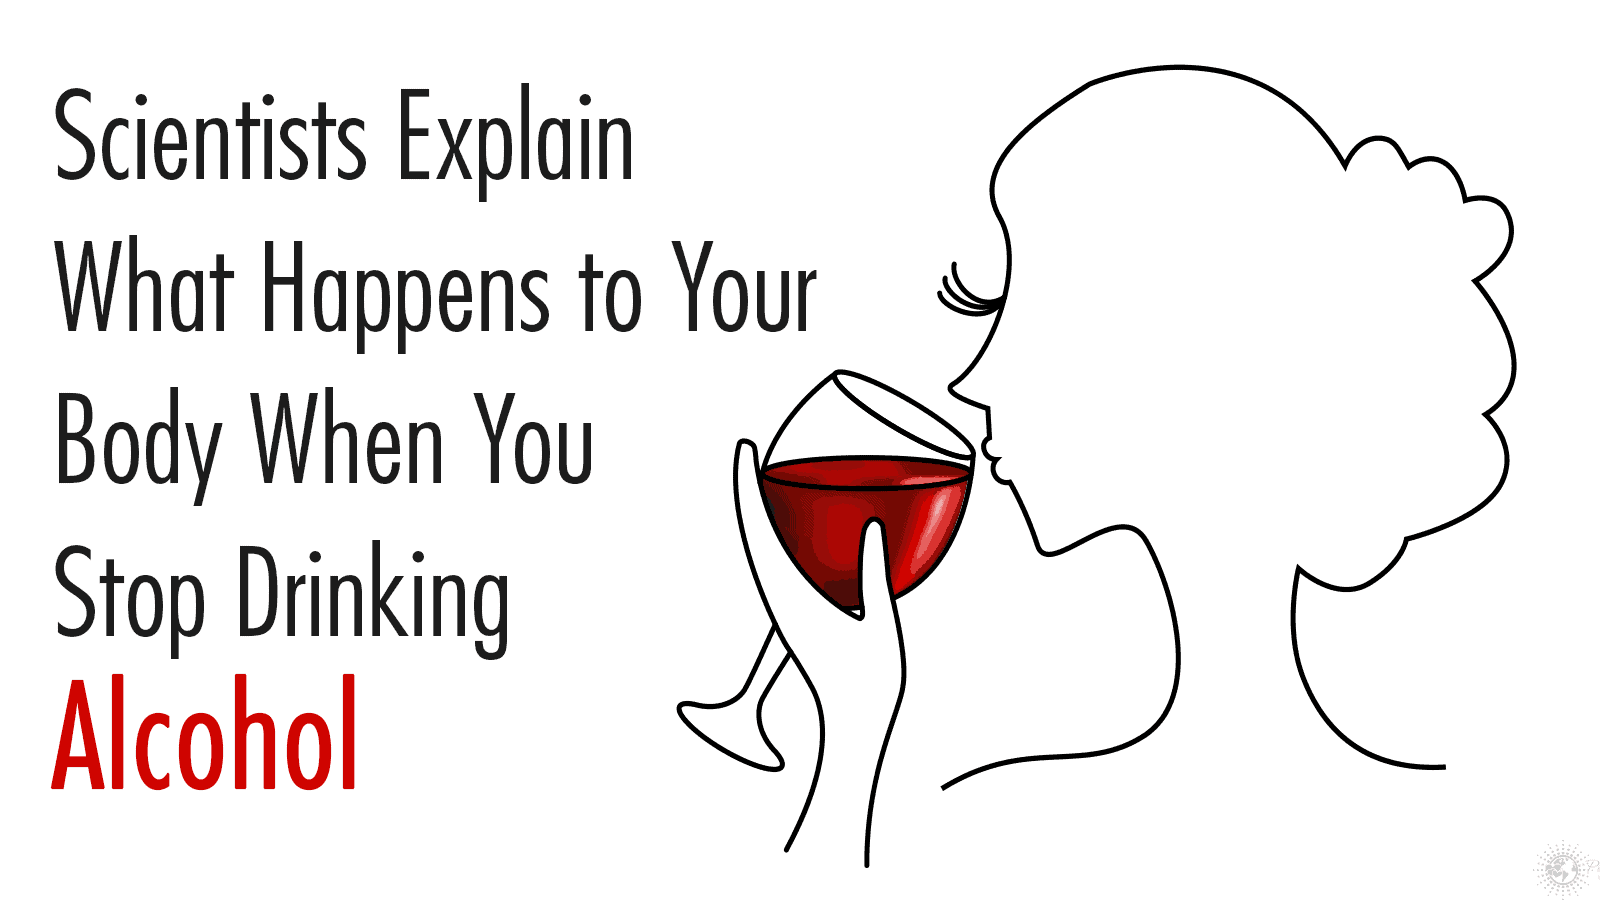 Scientists Explain What Happens to Your Body When You Stop Drinking Alcohol